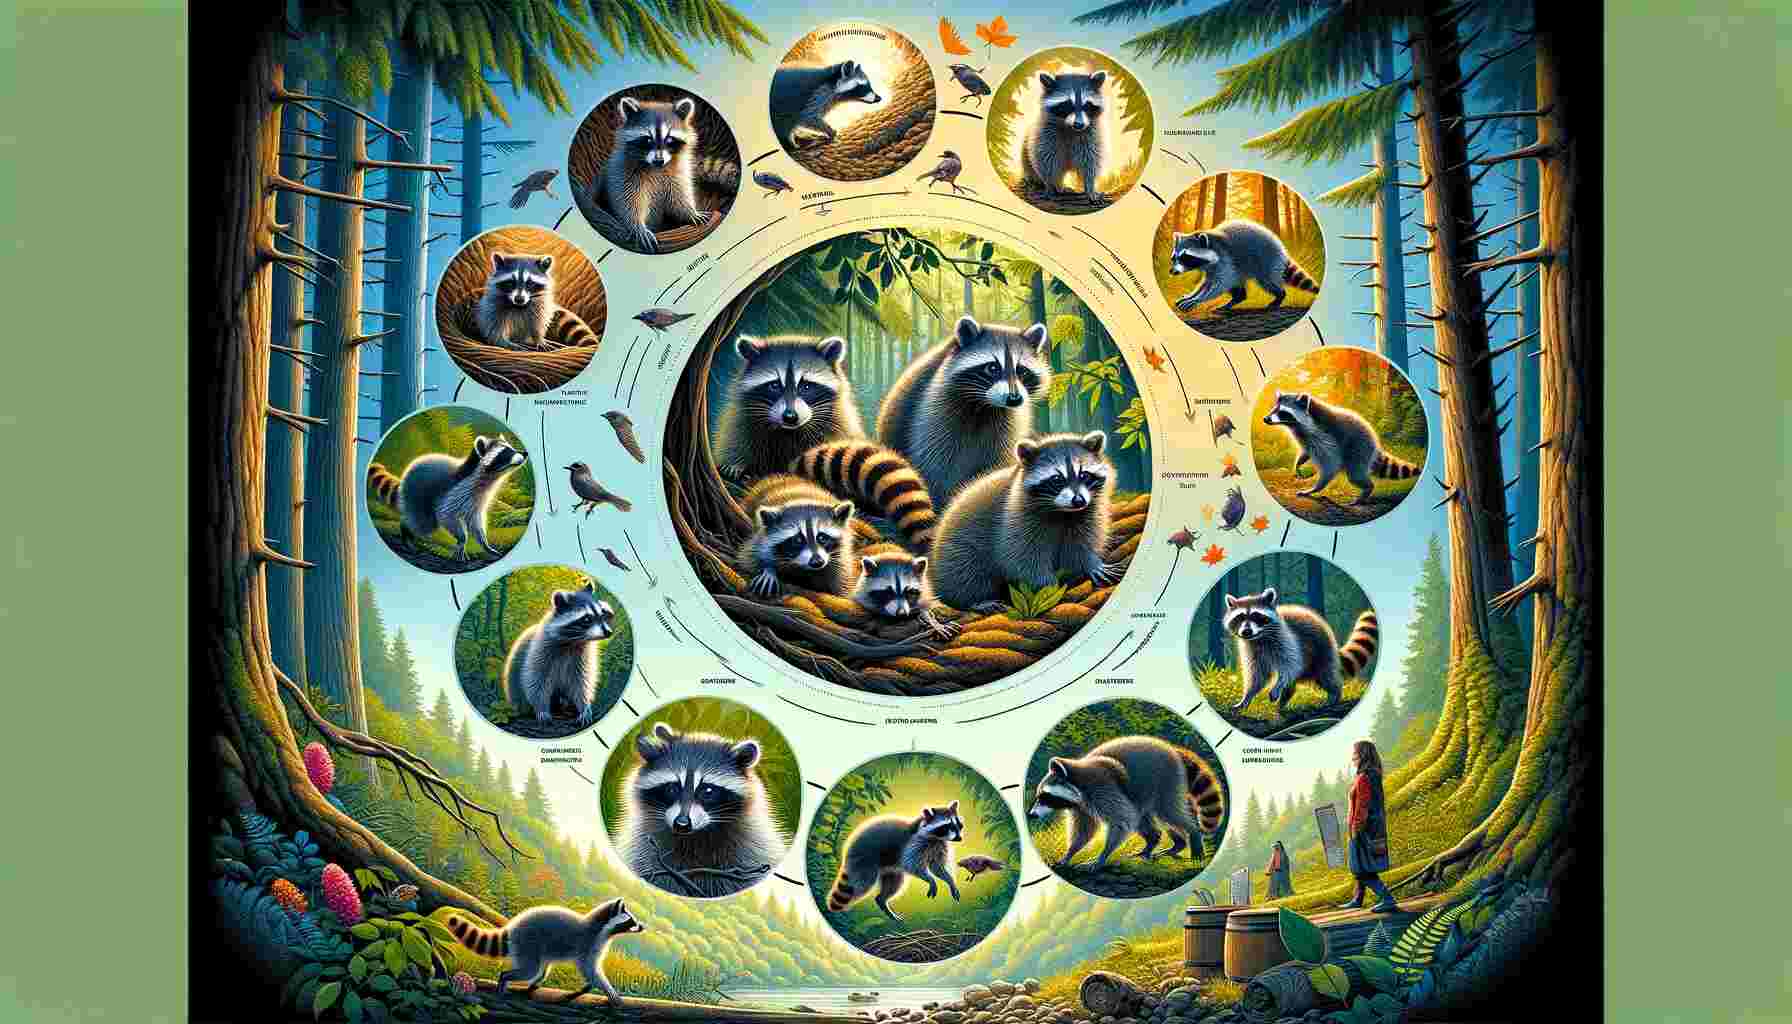 An illustration depicting the life cycle of a raccoon from birth to adulthood, showing newborn kits in a den, juvenile raccoons exploring with their mother, and adult raccoons foraging in a forest, set against a natural woodland background.